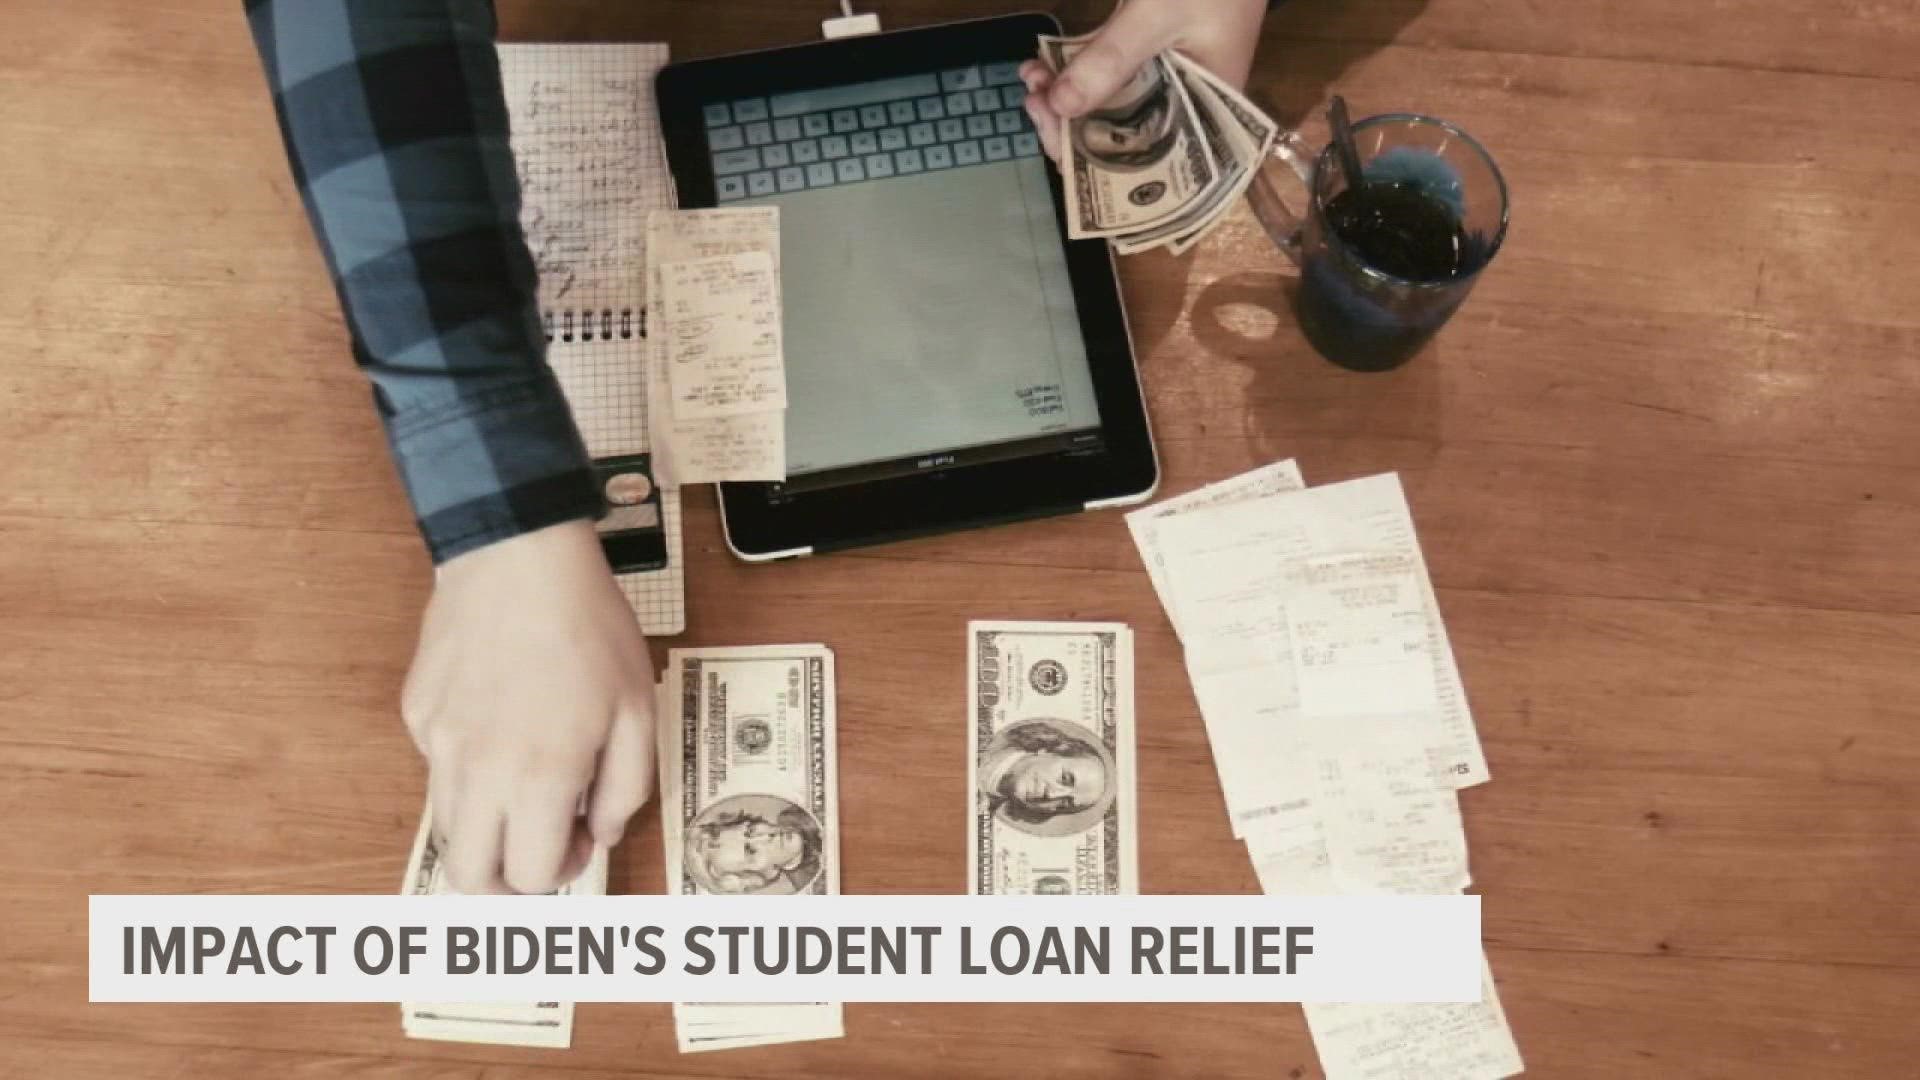 With Biden's plan to help relieve student loan debt, many people will be able to significantly raise their credit scores.